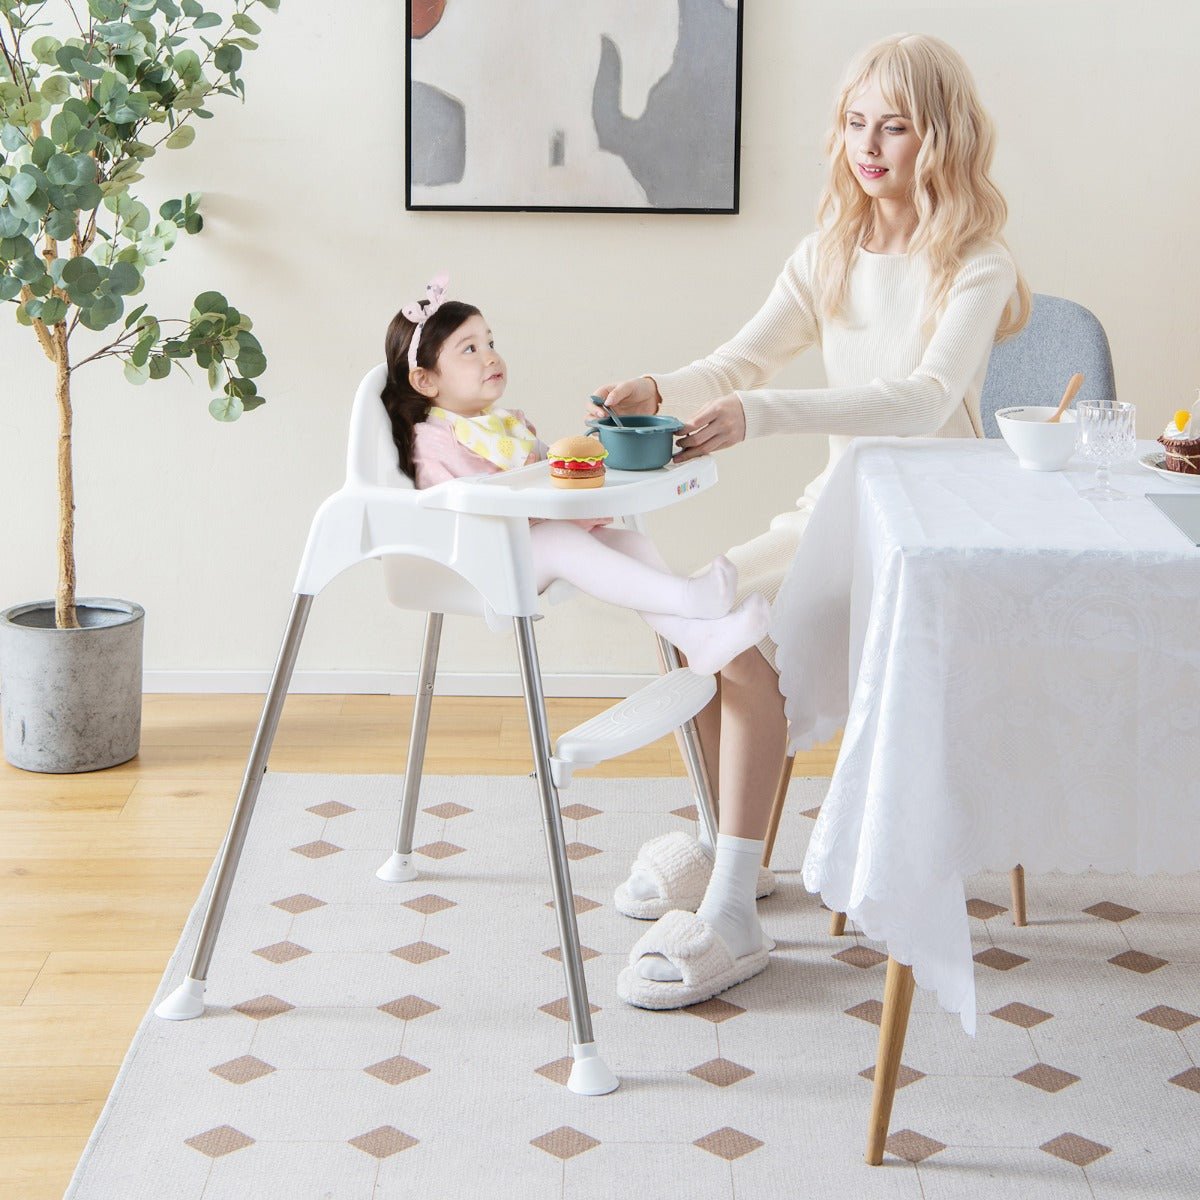 Buy the Ultimate White 4-in-1 Baby High Chair for Mealtime Joy